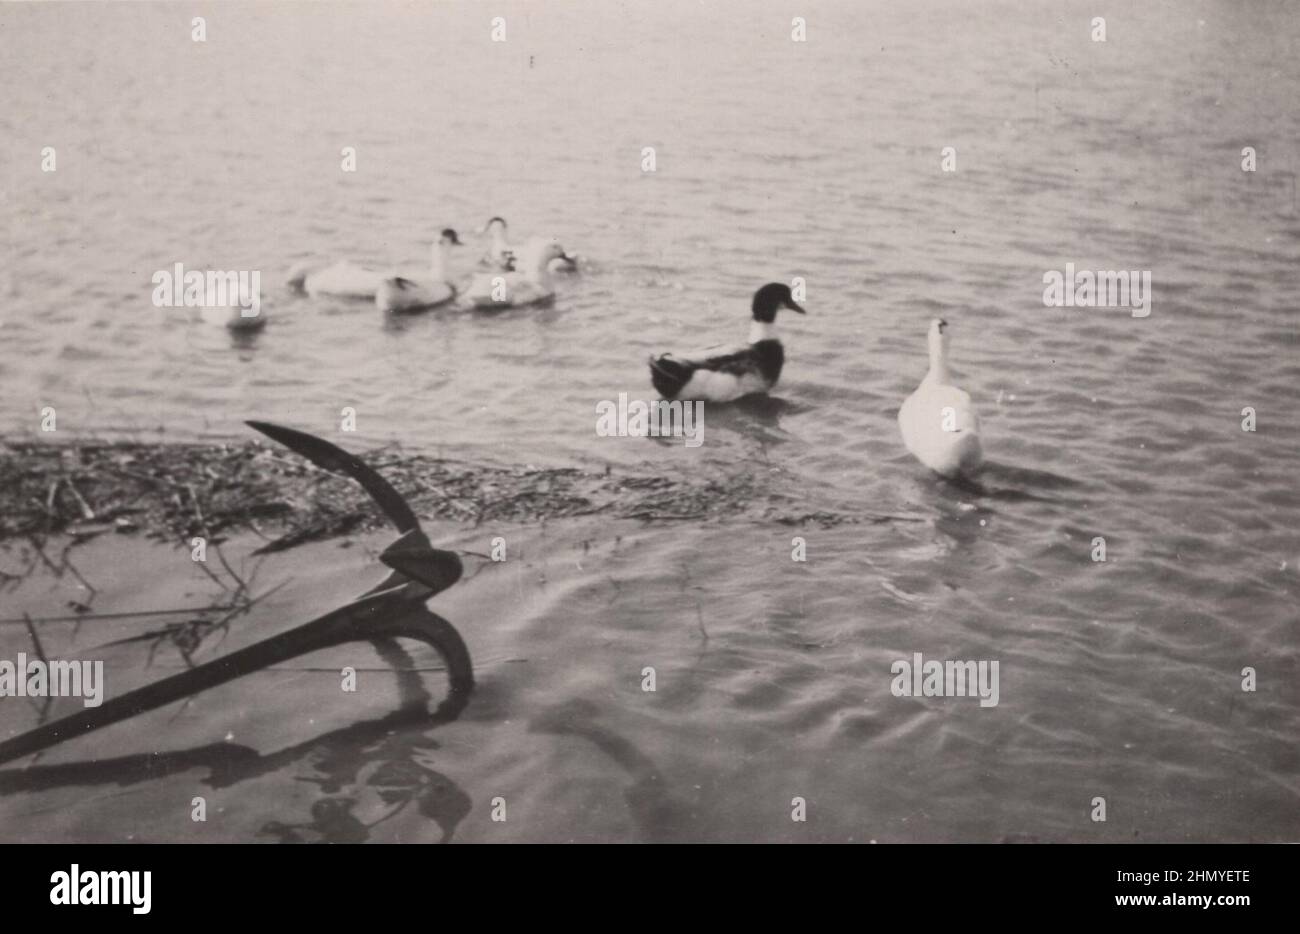 vintage, monochrome artist photo about massive cast iron ship anchor lying in the lake, with black and white ducks ADDITIONAL-RIGHTS-CLEARANCE-INFO-NOT-AVAILABLE Stock Photo